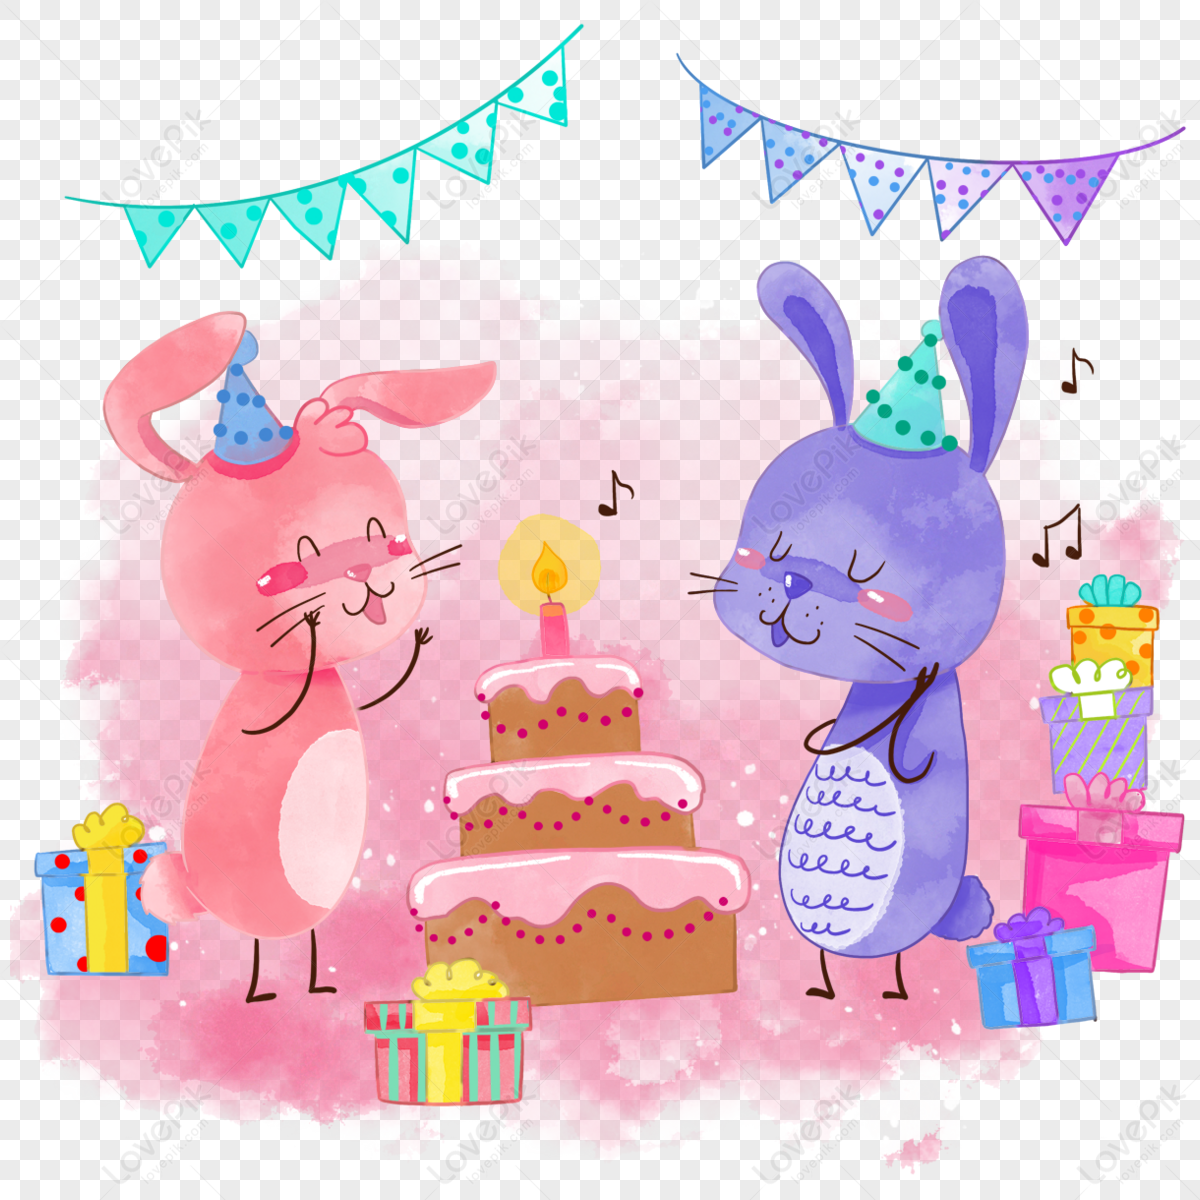 Watercolor animal rabbit,happy,cheerful,character png picture